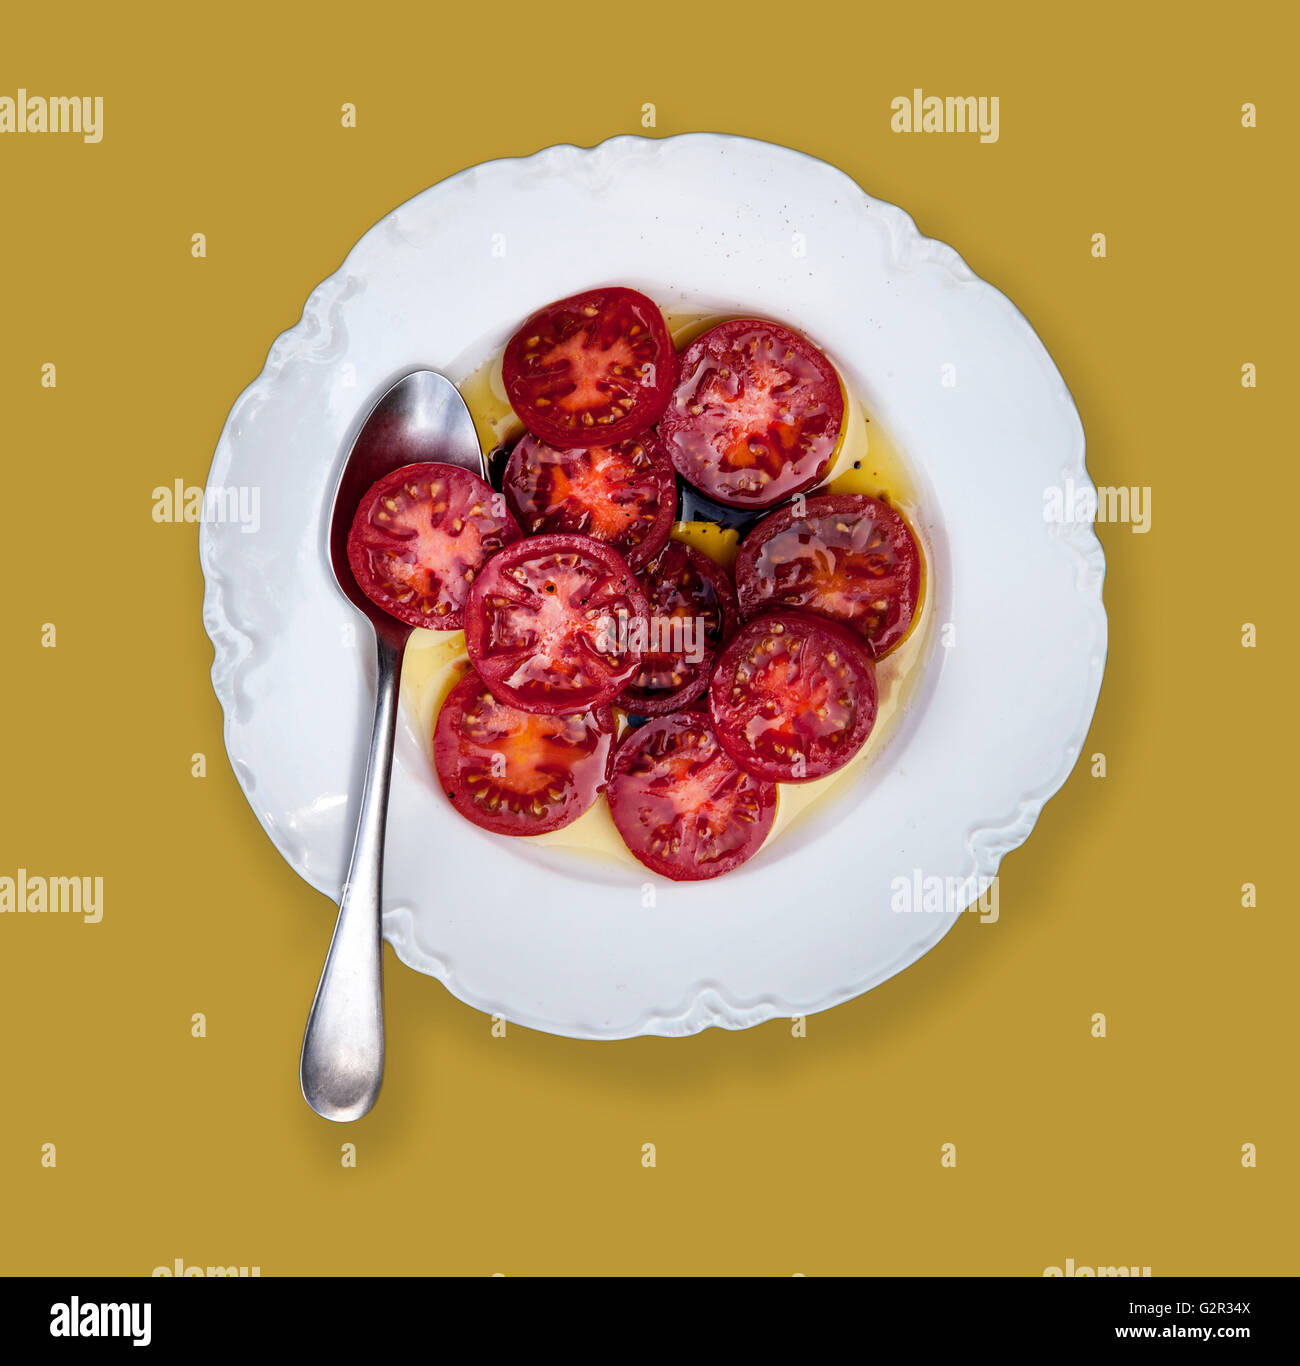 sliced tomatoes on plate Stock Photo